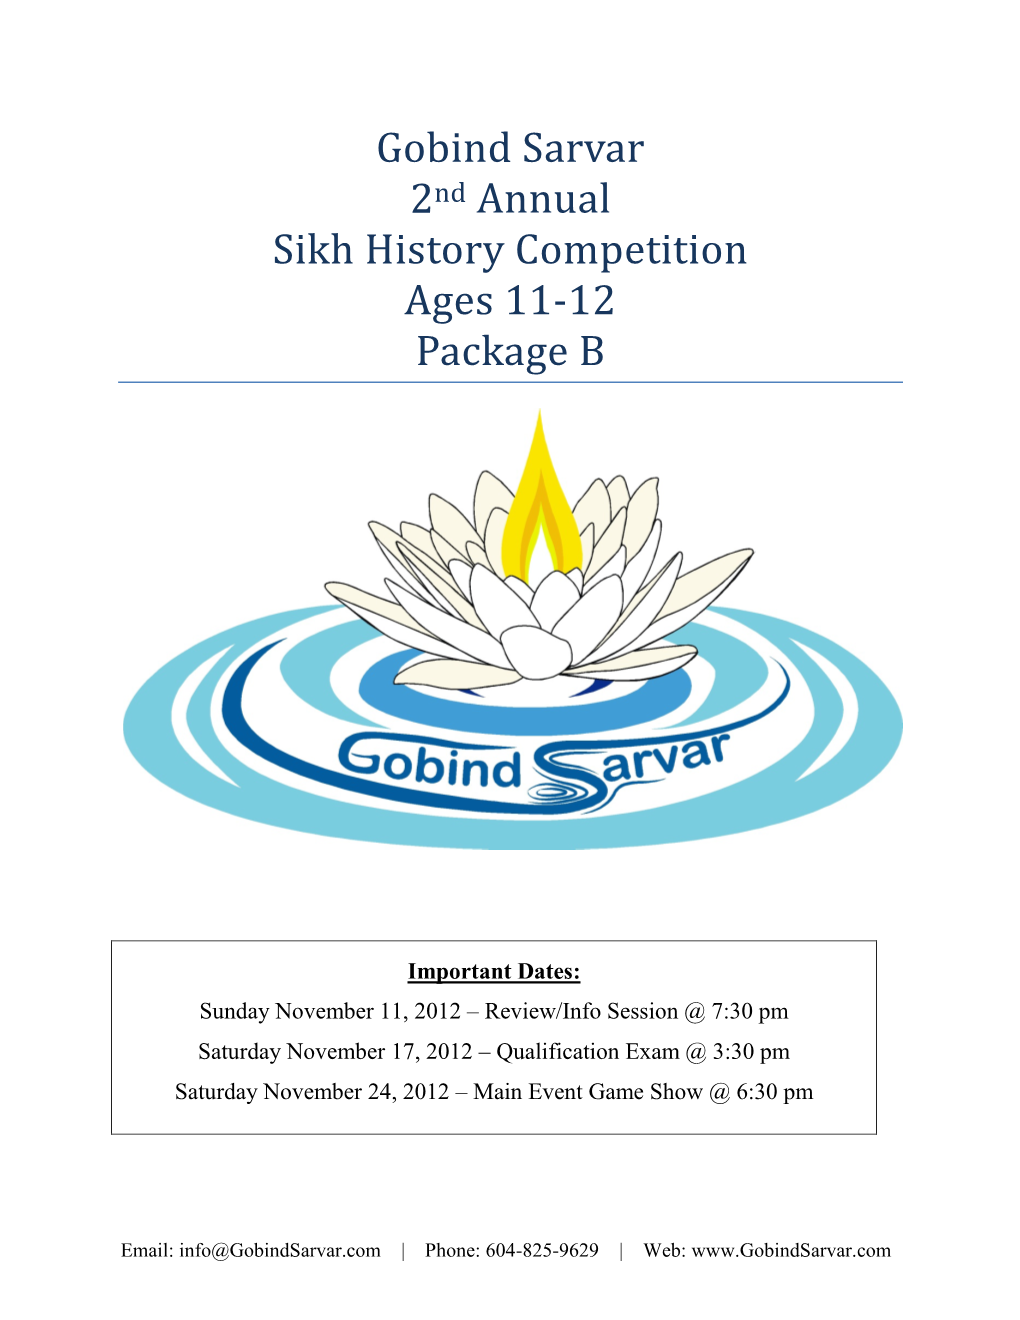 Gobind Sarvar 2Nd Annual Sikh History Competition Ages 11-12 Package B